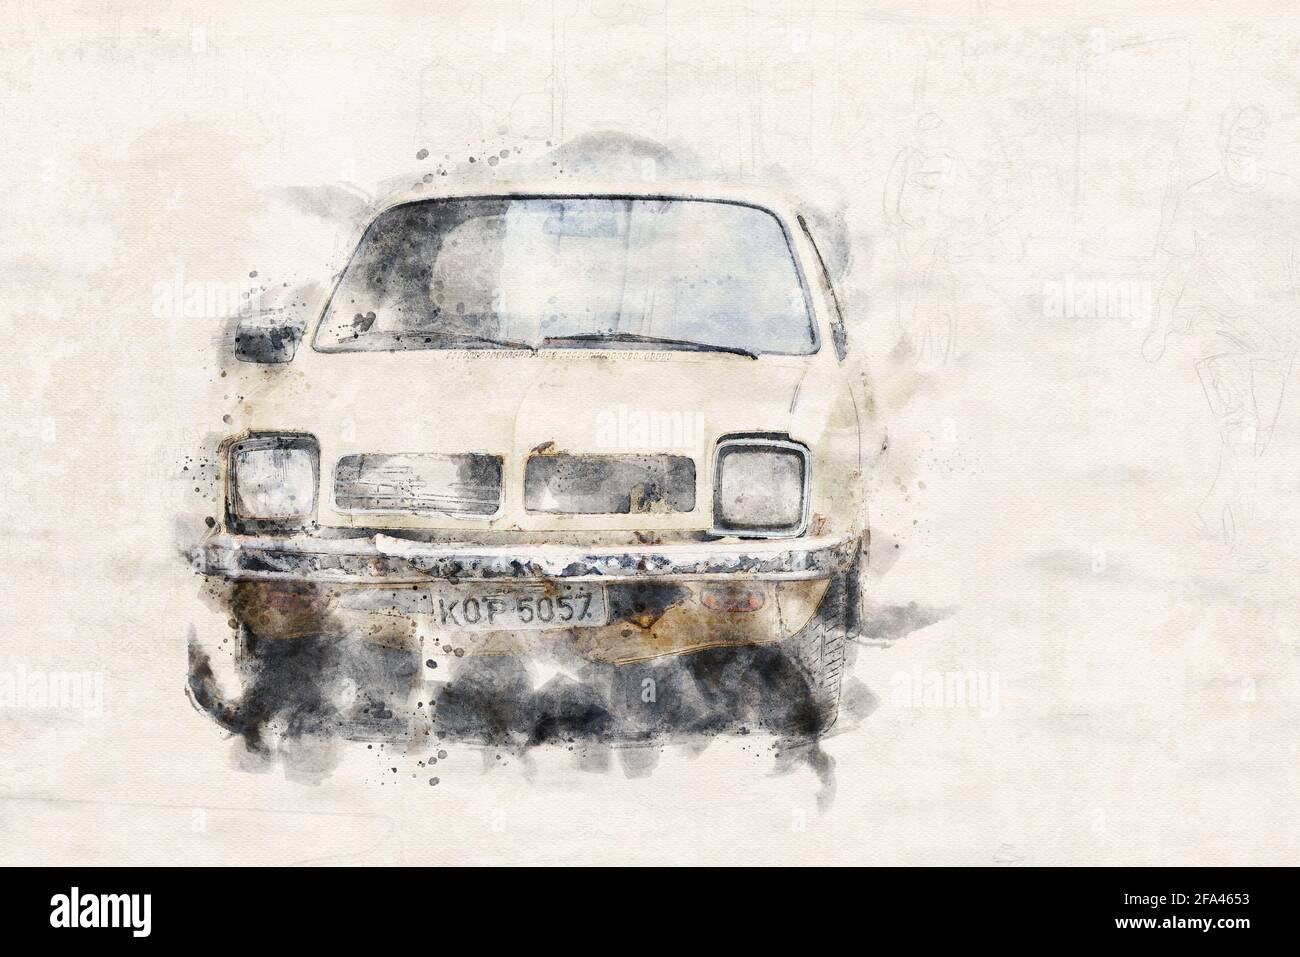 Brazil, 2020: Watercolor painting of an old car. Front view of a rusty machine. Gasoline powered car model. Stock Photo